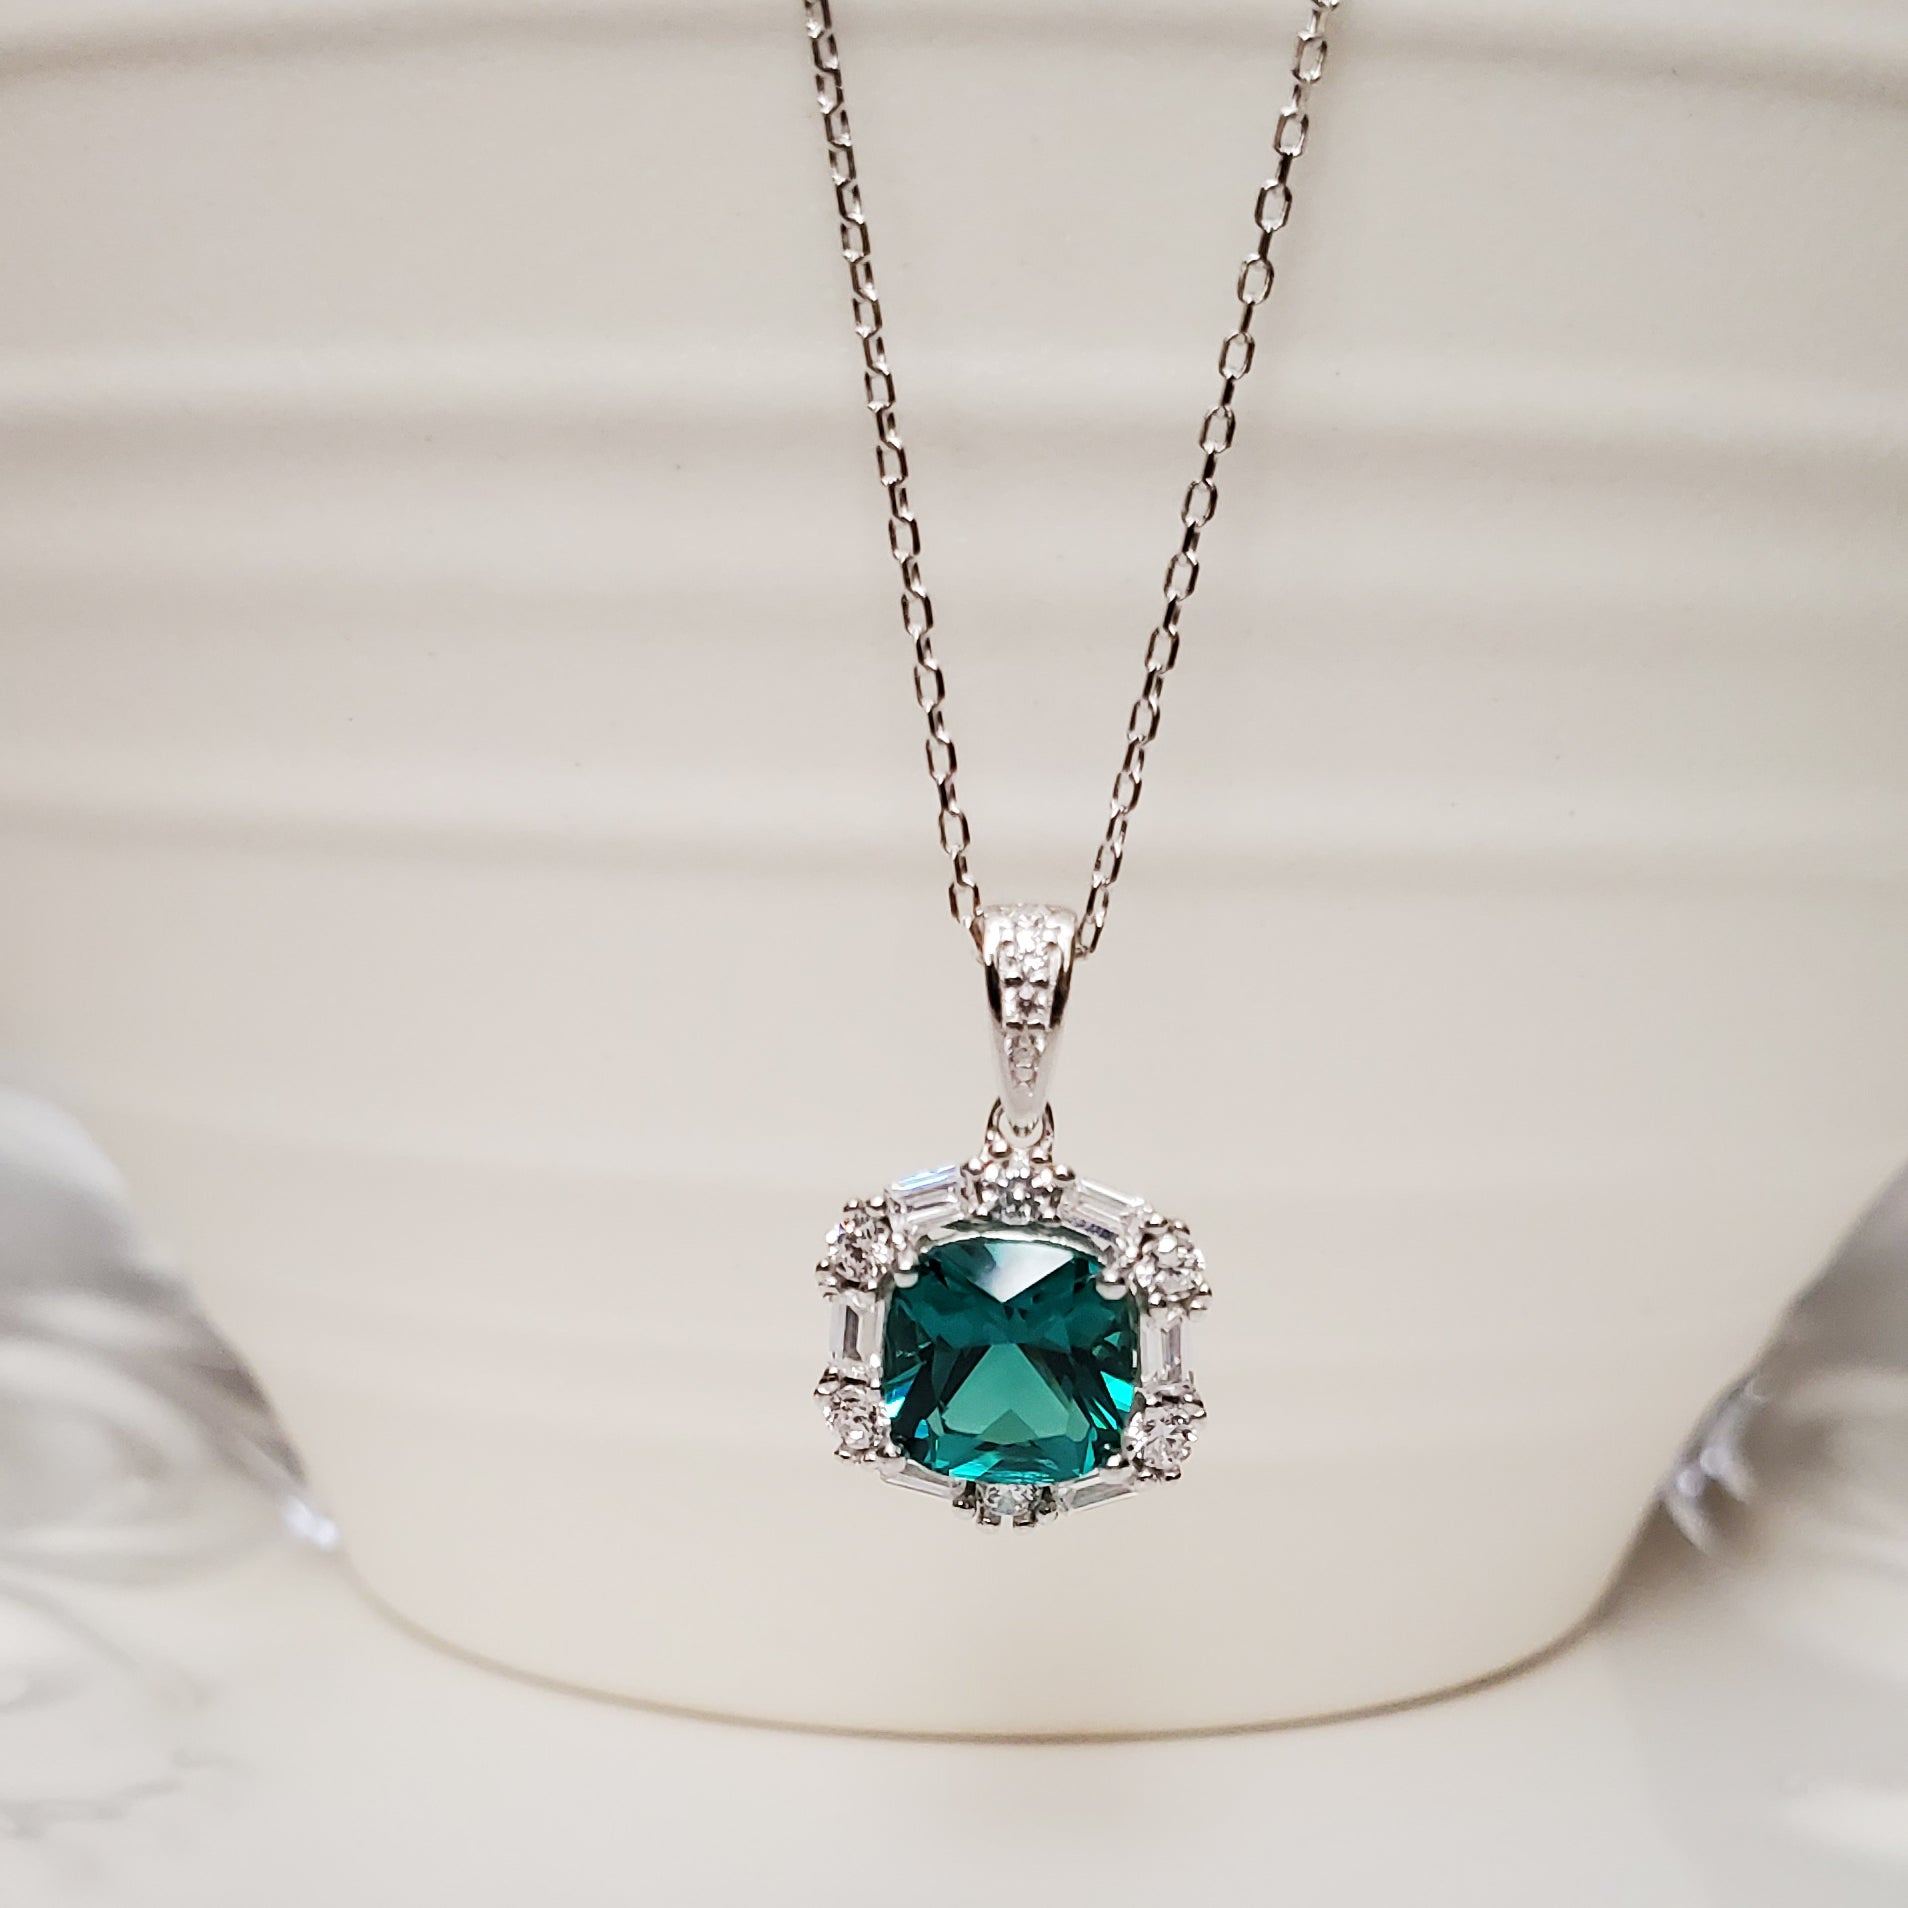 Emerald Gemstone With Diamond Accents Pendant Necklace for Women's